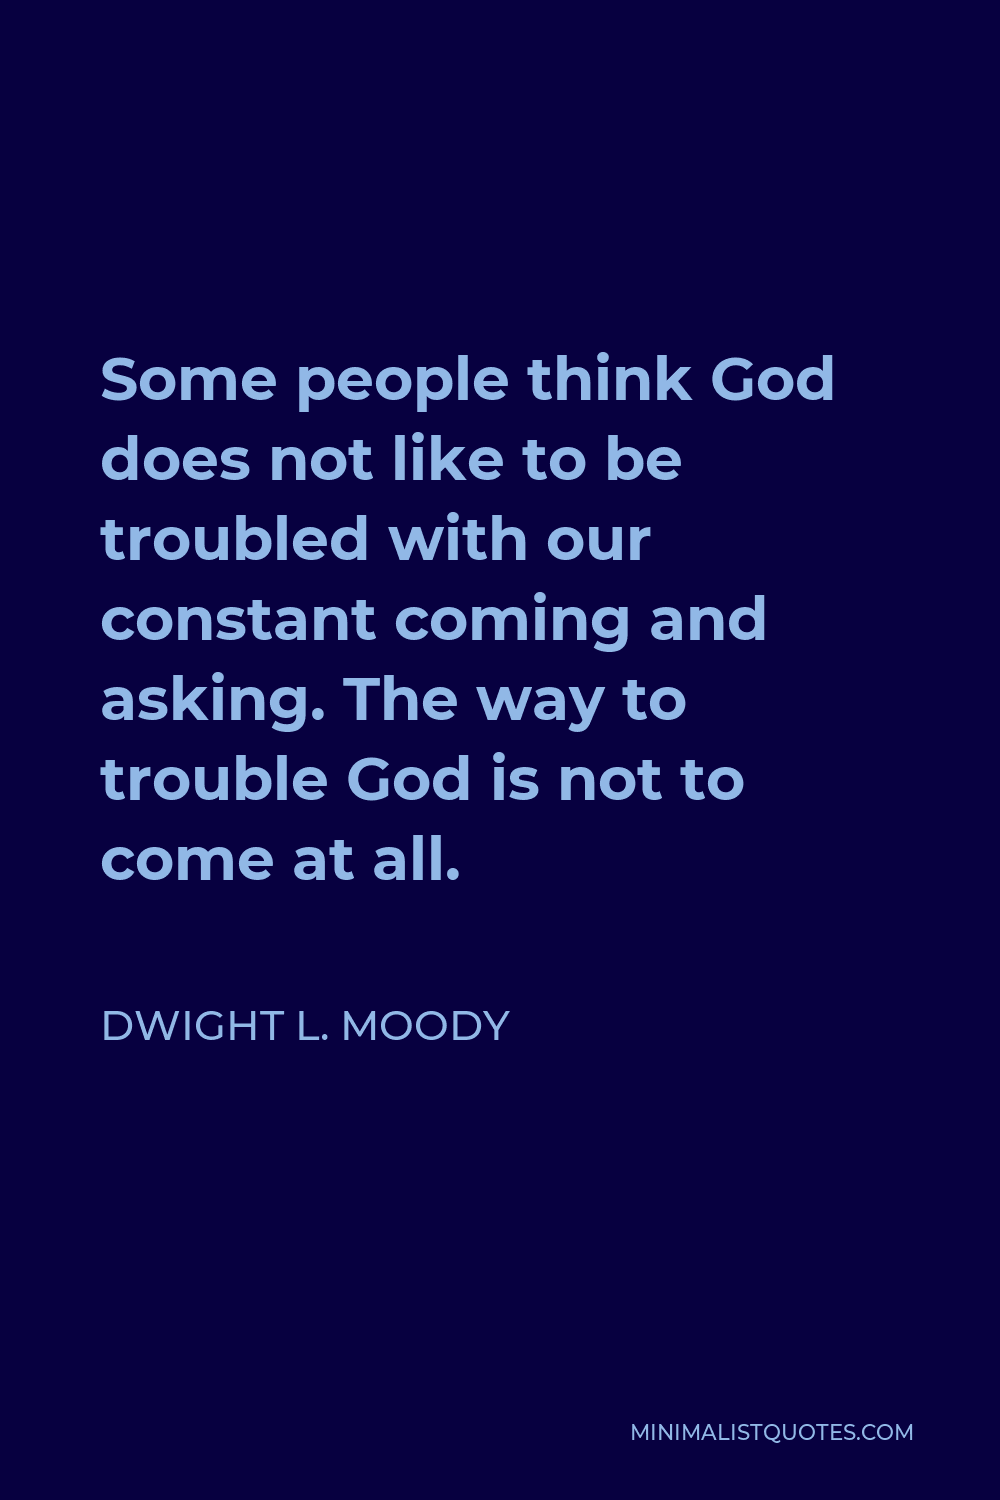 Dwight L. Moody Quote - Some people think God does not like to be troubled with our constant coming and asking. The way to trouble God is not to come at all.